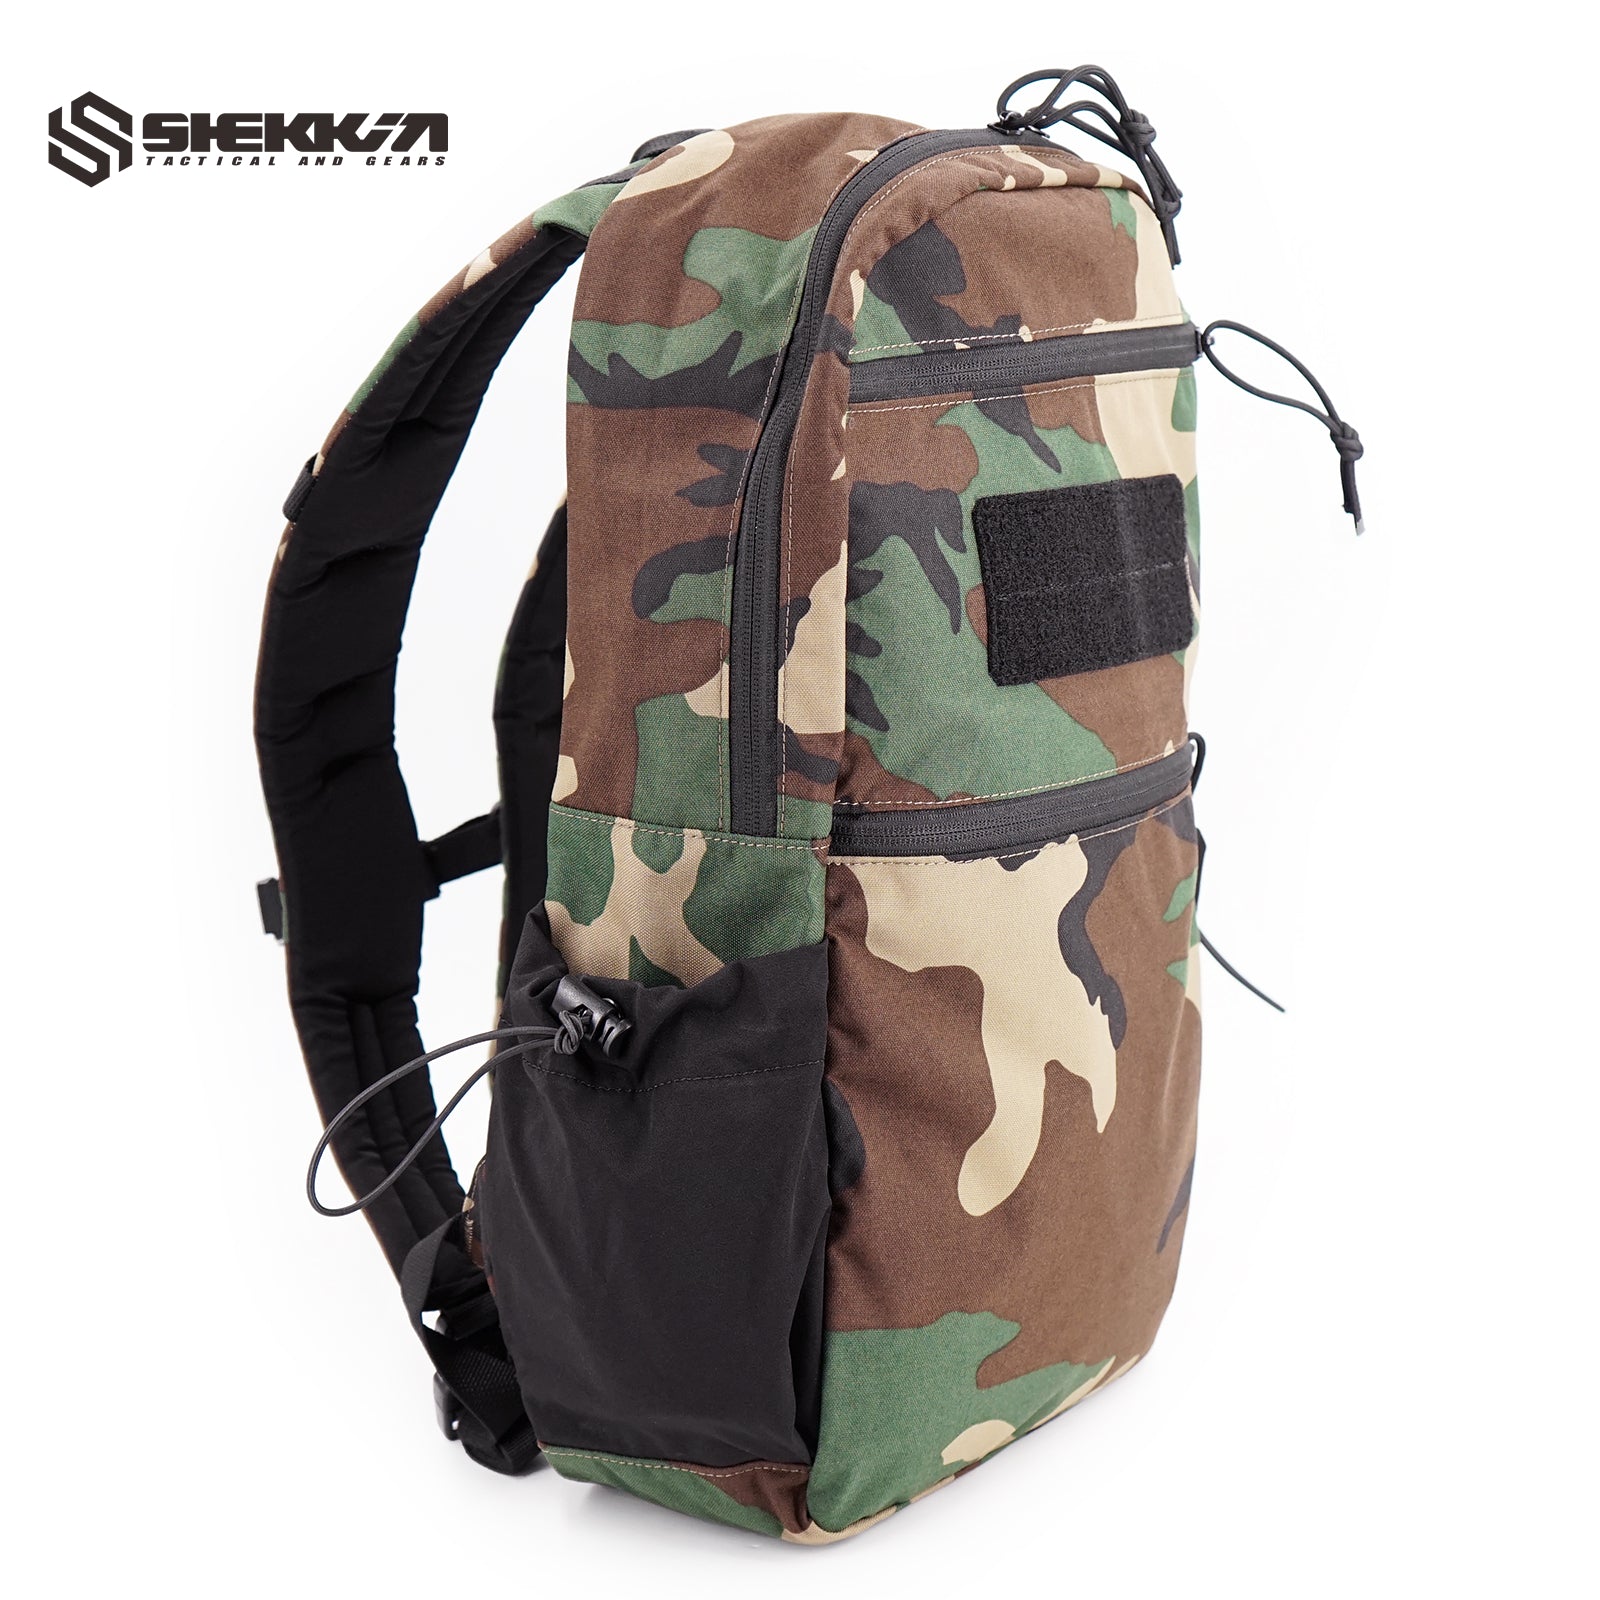 Shekkin gears tactical gears 8005a style Day pack